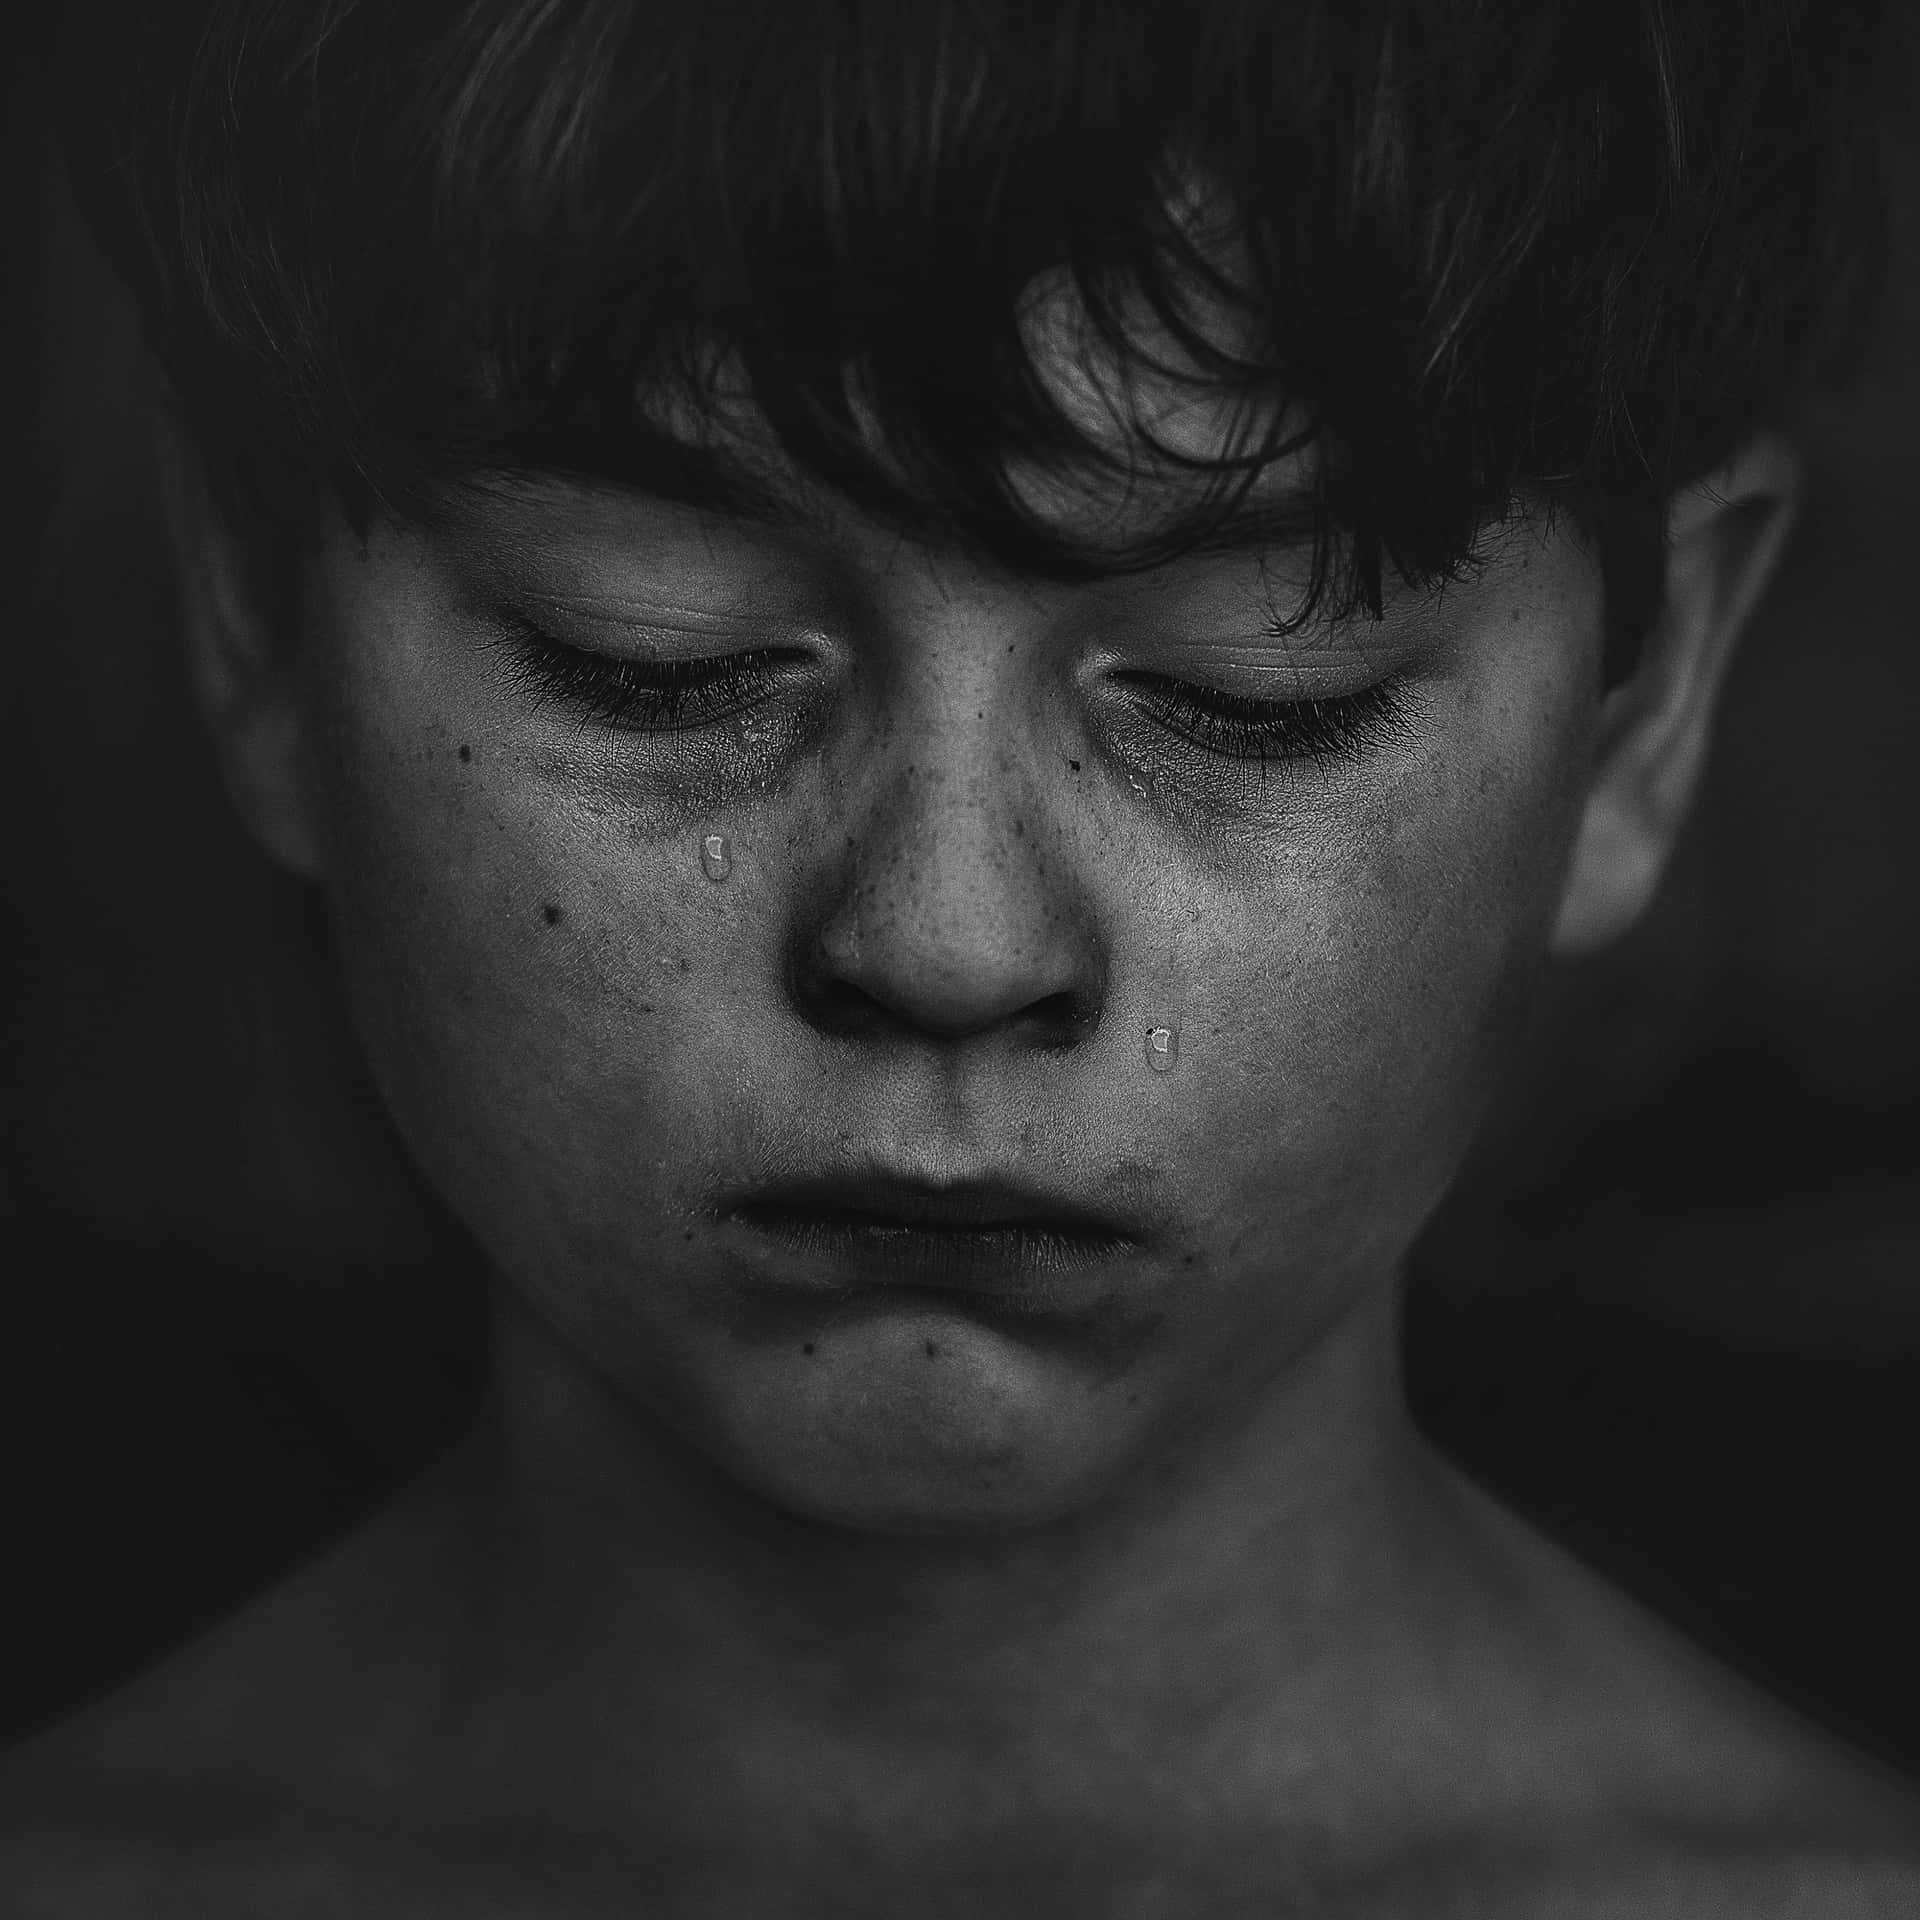 A Black And White Photo Of A Boy With Tears